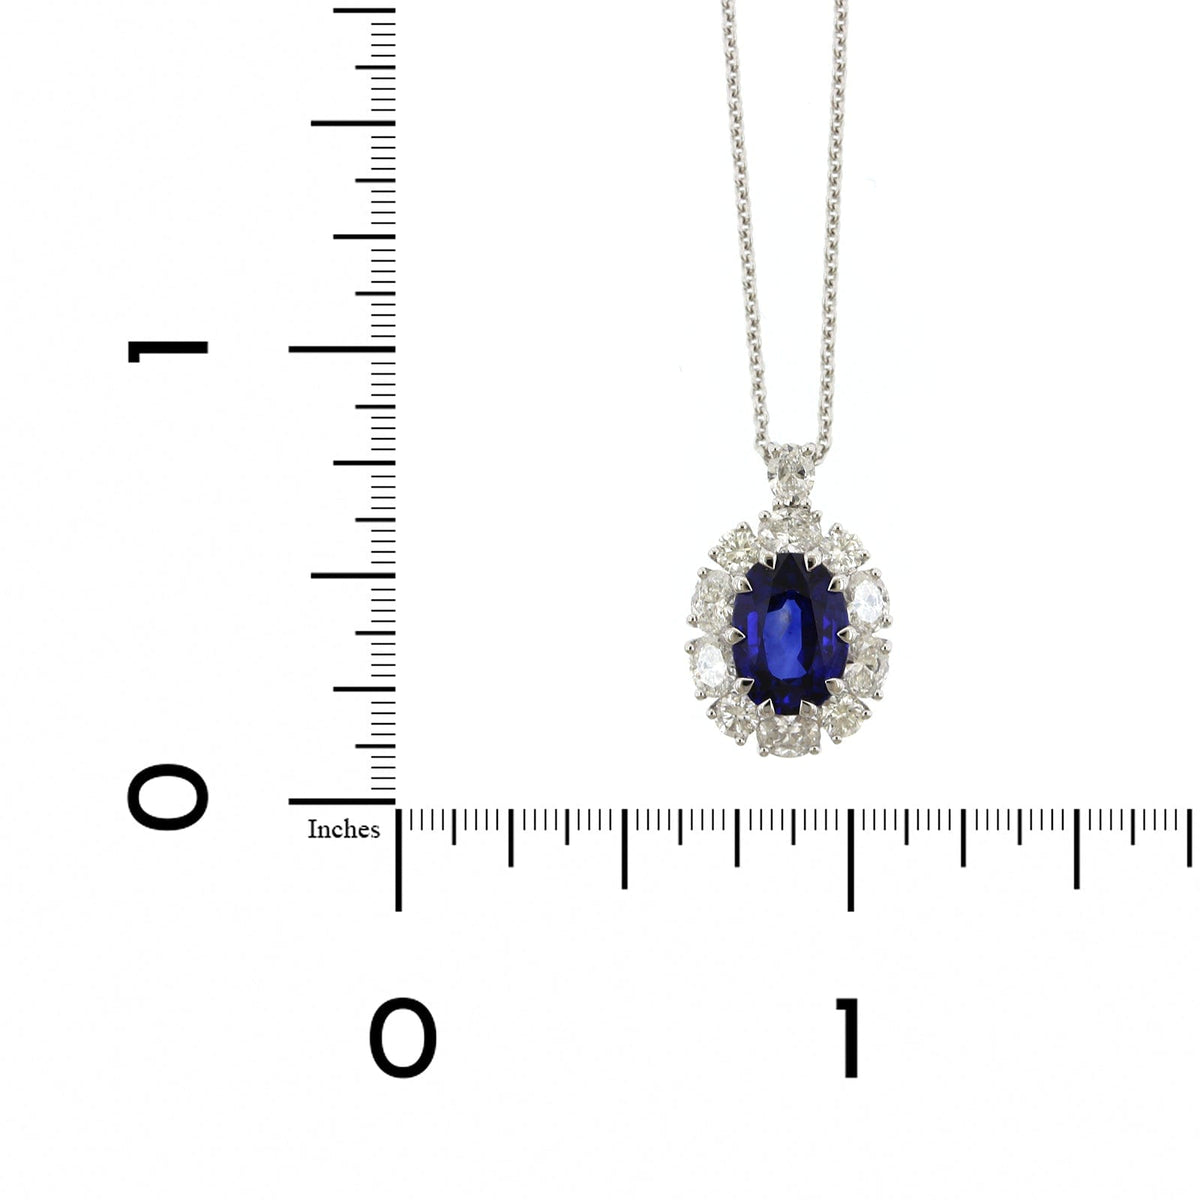 18K White Gold Oval Sapphire and Diamond Halo Necklace